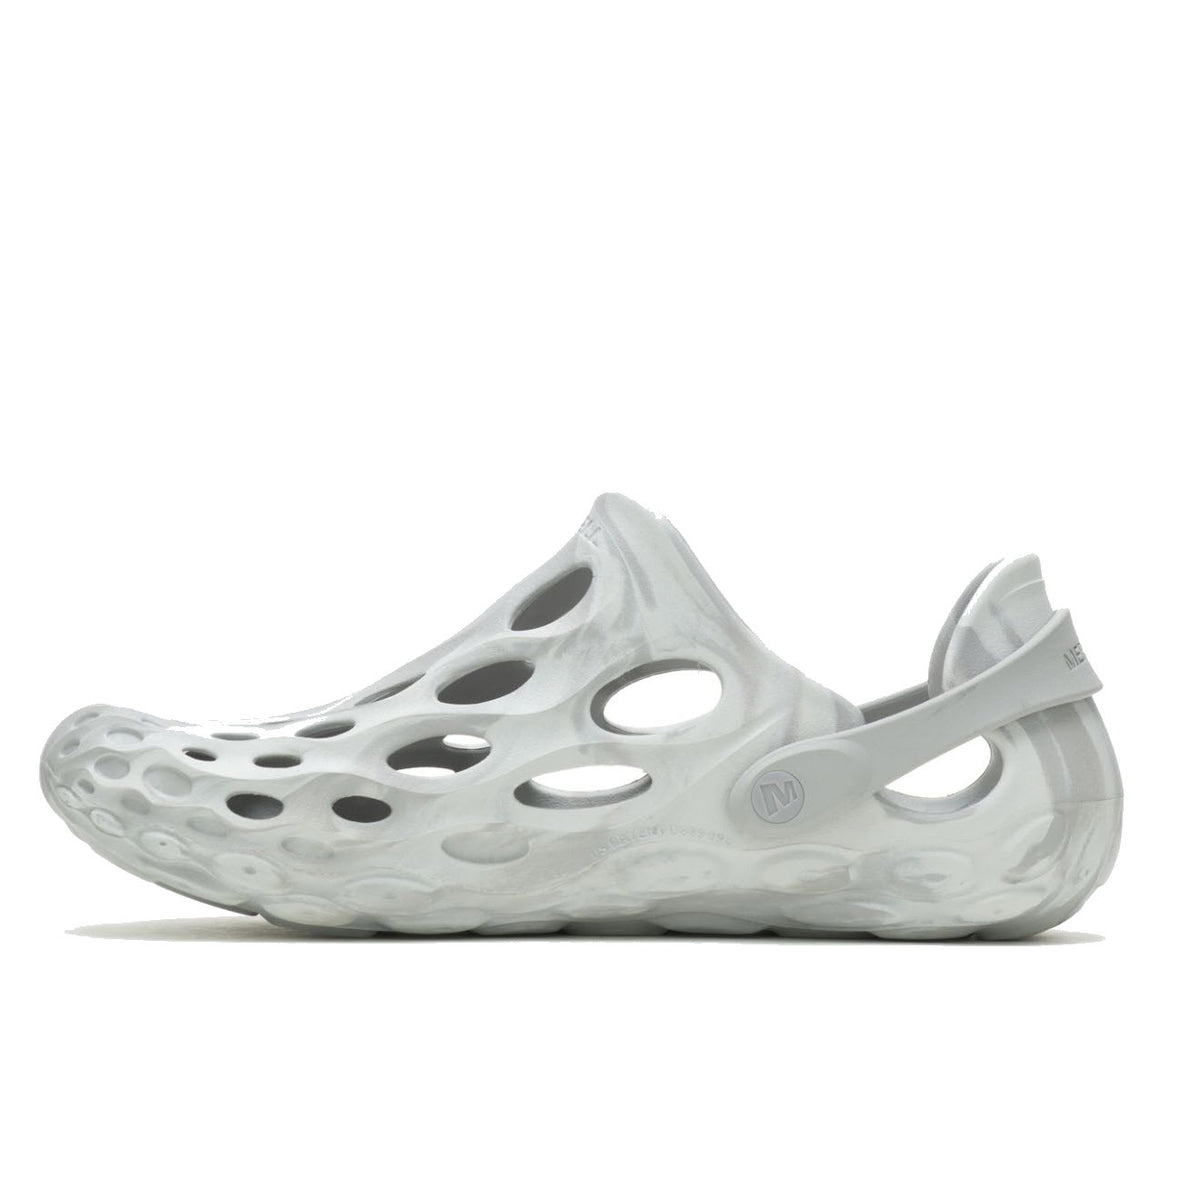 A single white foam clog made of water-friendly EVA foam, with numerous circular cut-outs and a pivoting heel strap, displayed against a white background MERRELL HYRDRO MOC PALOMA - MENS.